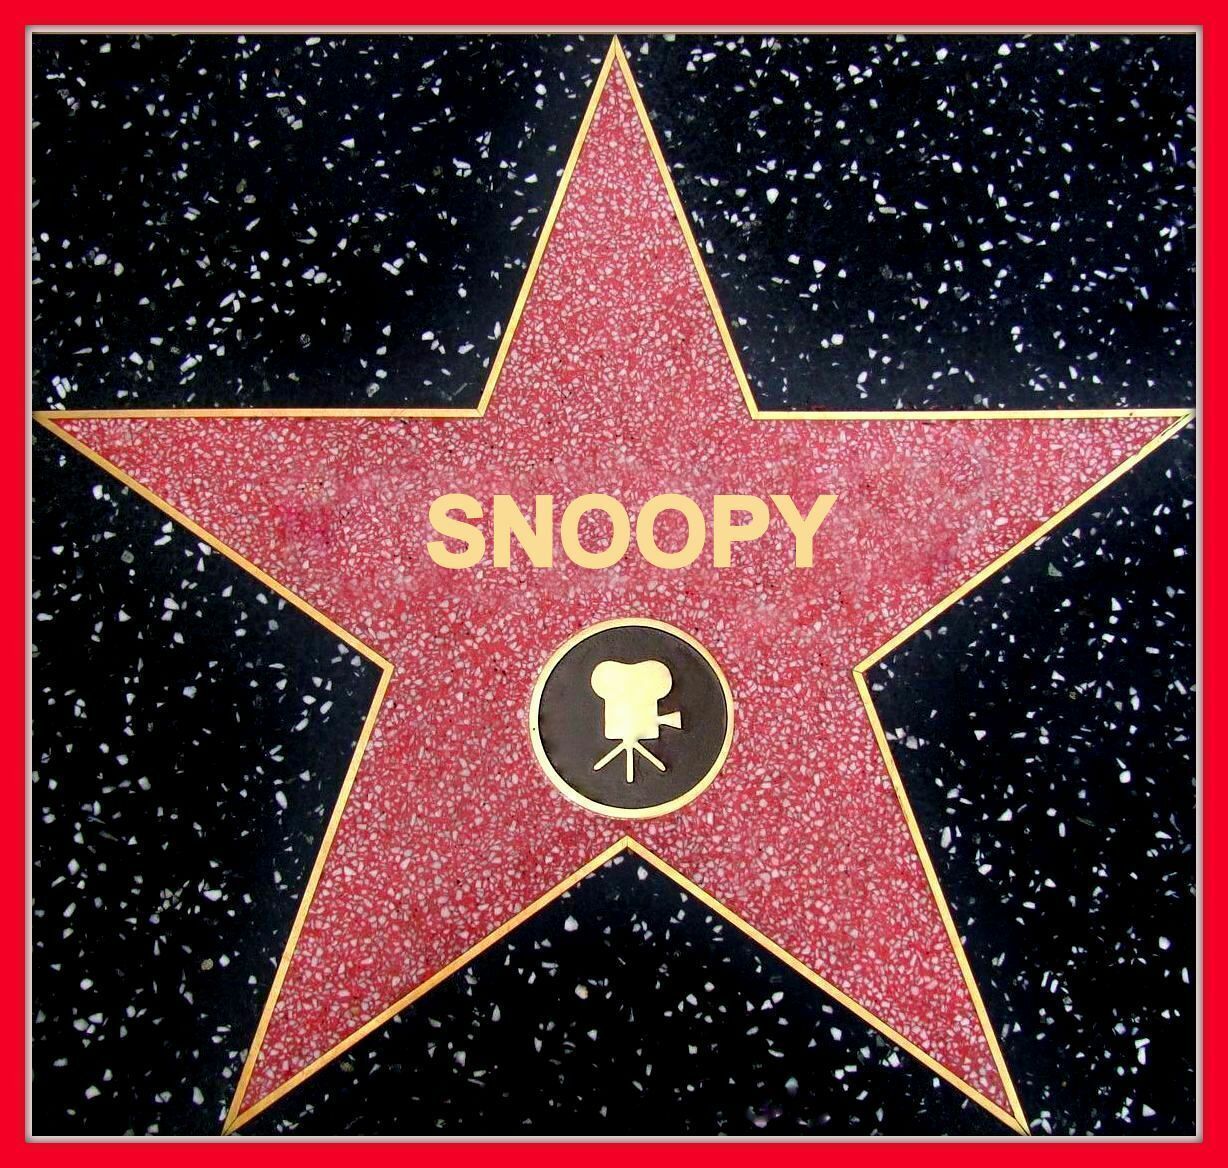 CUSTOMIZED HOLLYWOOD WALK OF FAME STAR STICKER DECAL ADD YOUR NAME ALL SIZES - £5.81 GBP - £9.70 GBP